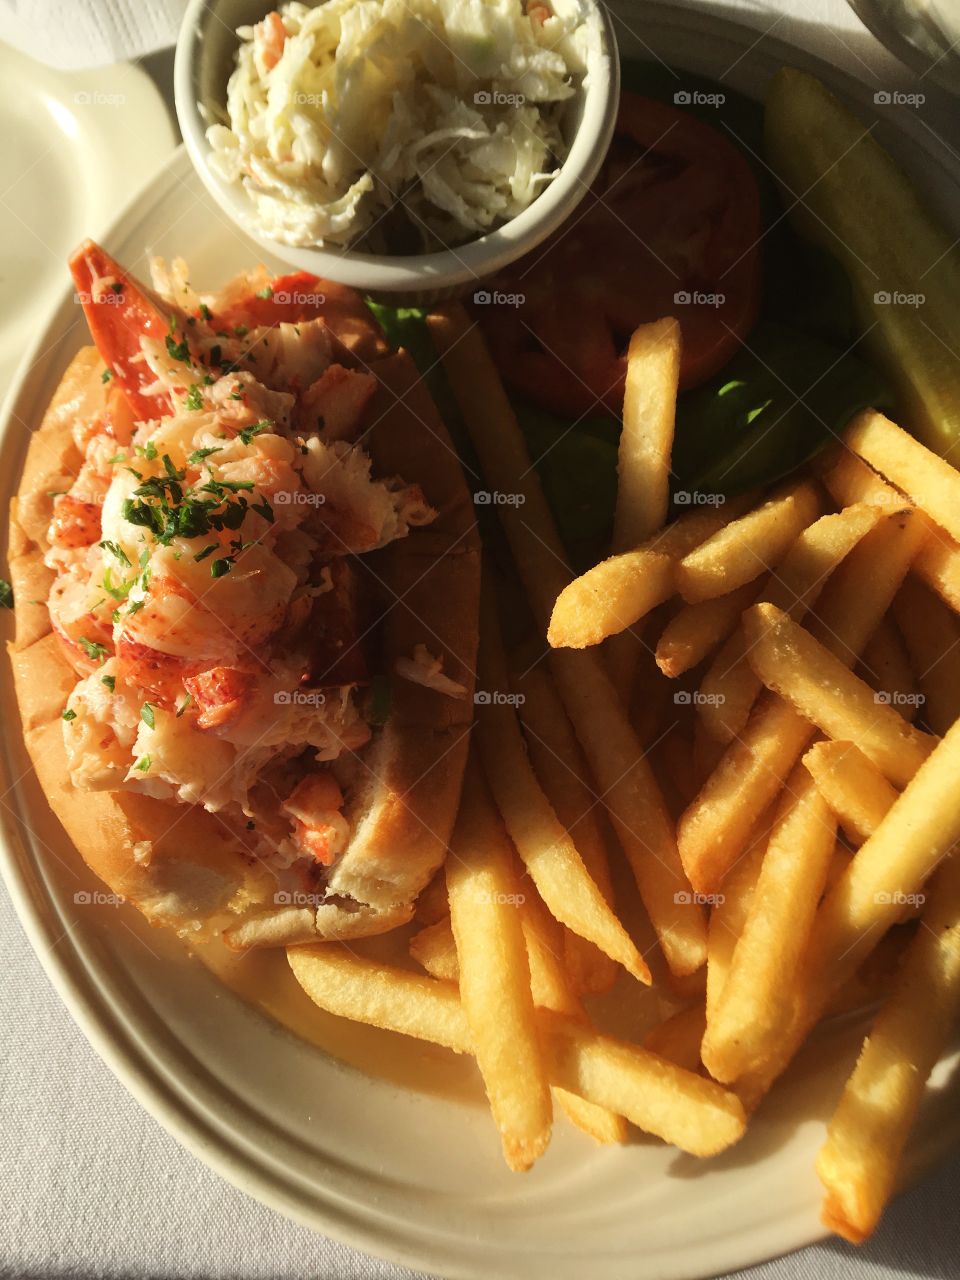 A classic New England lobster roll complete with French fries and coleslaw 